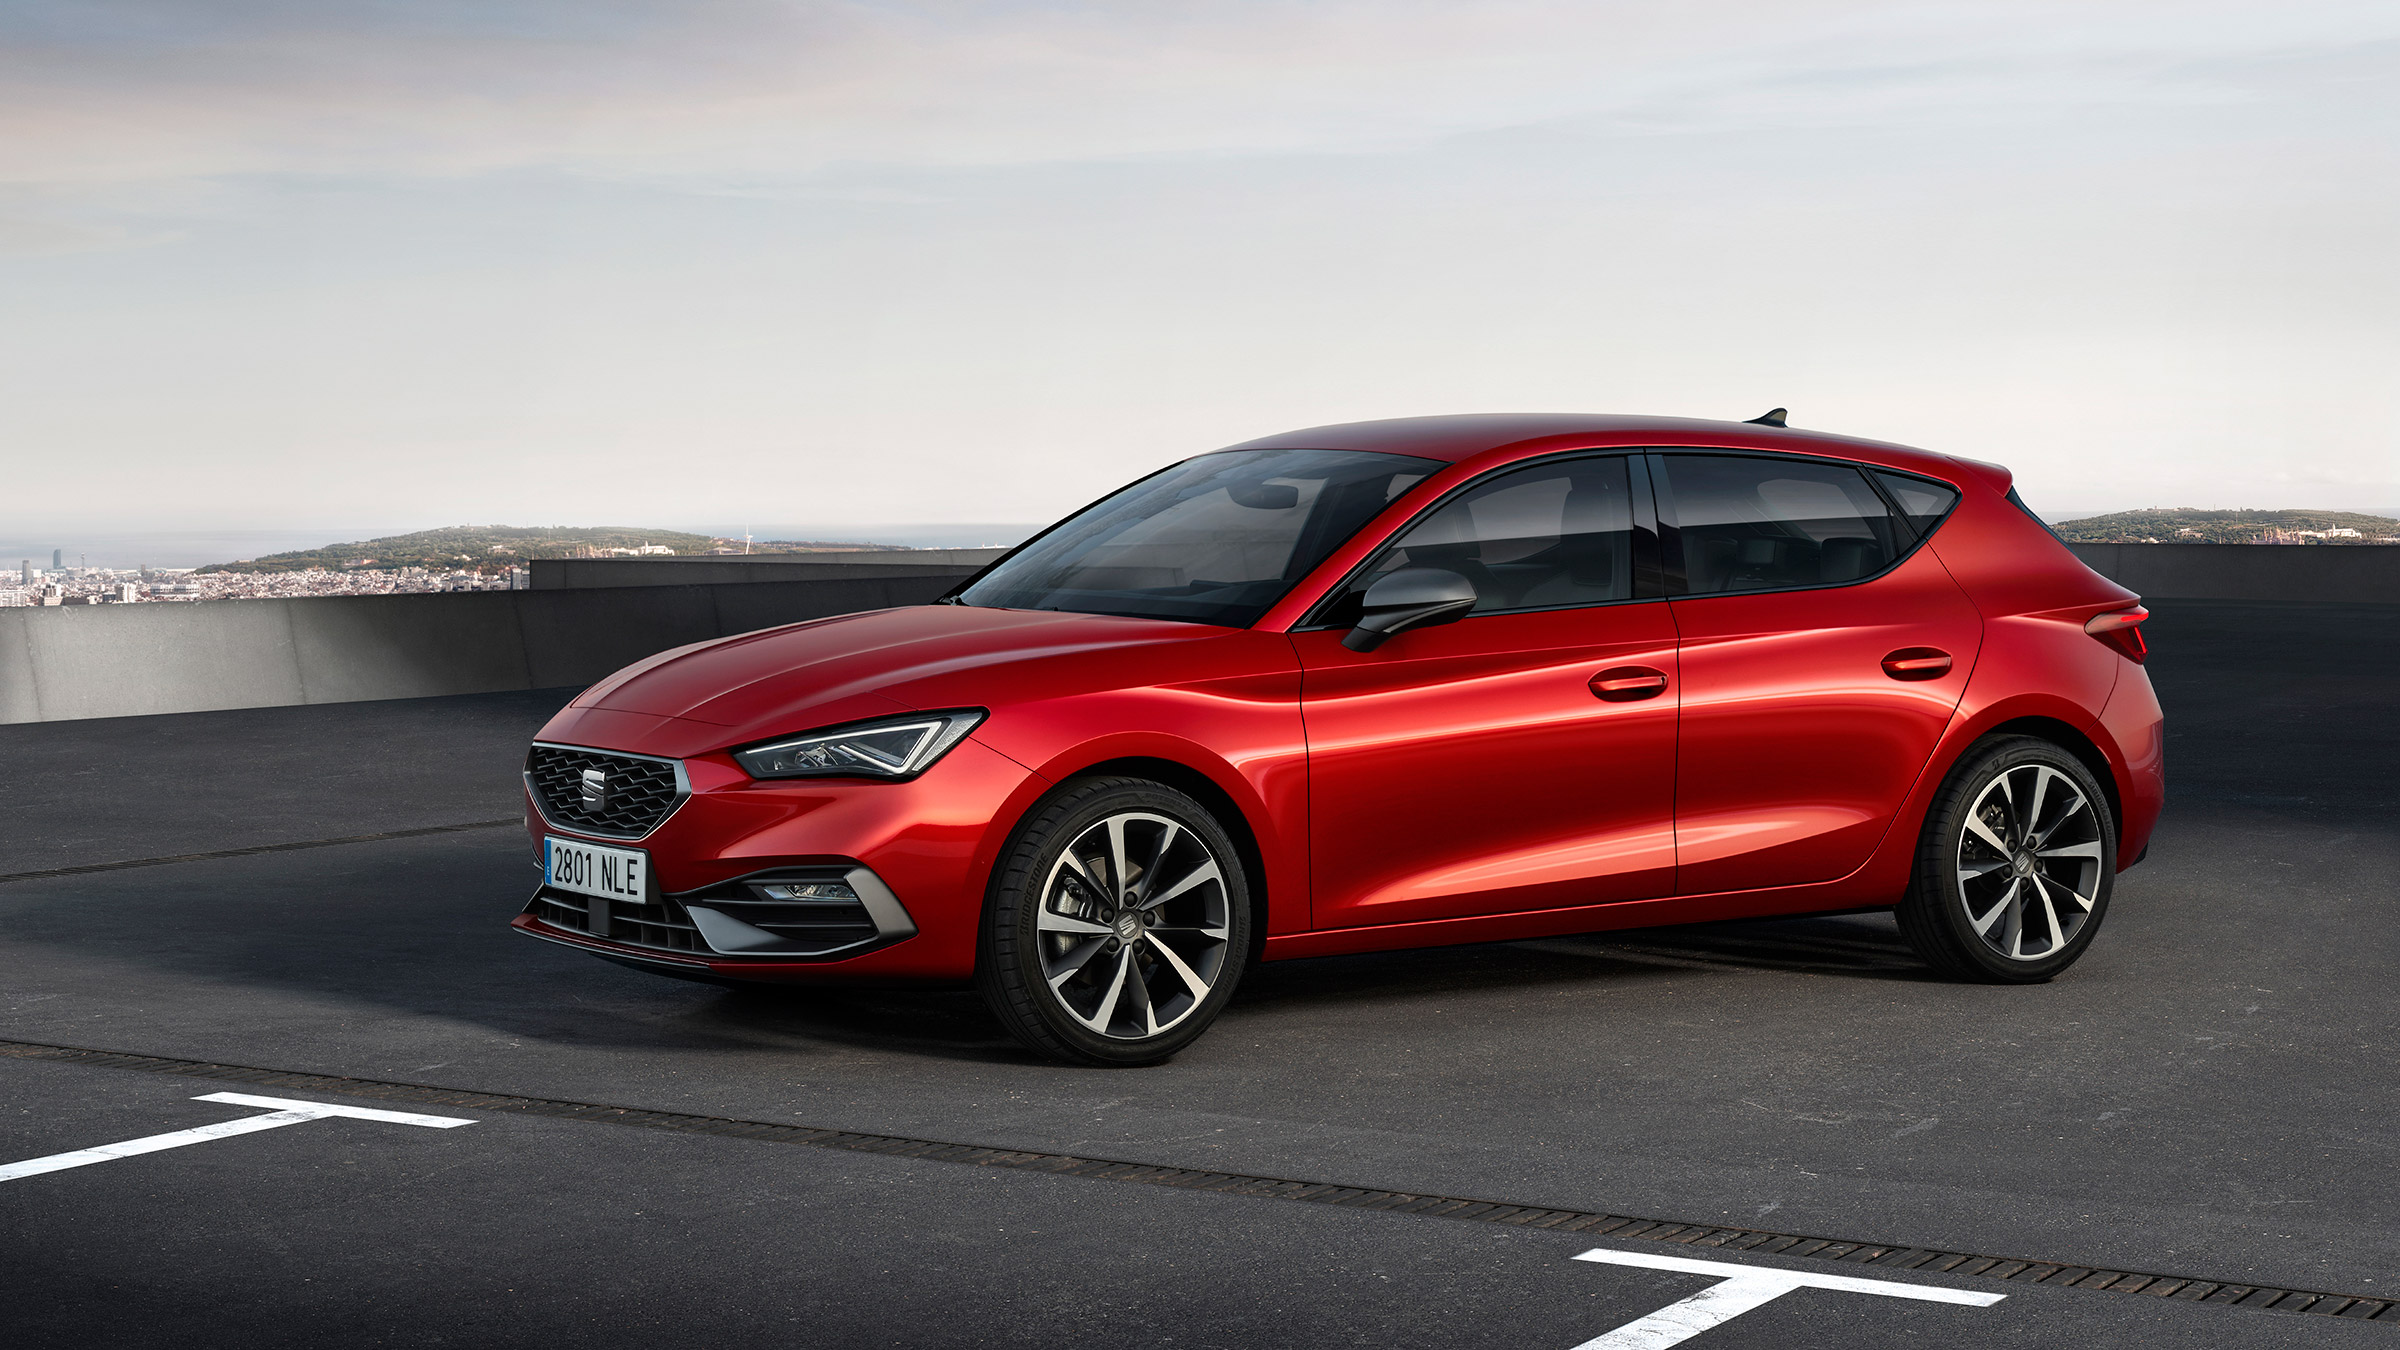 New 2020 SEAT Leon revealed – the Golf's Catalan cousin gets a makeover